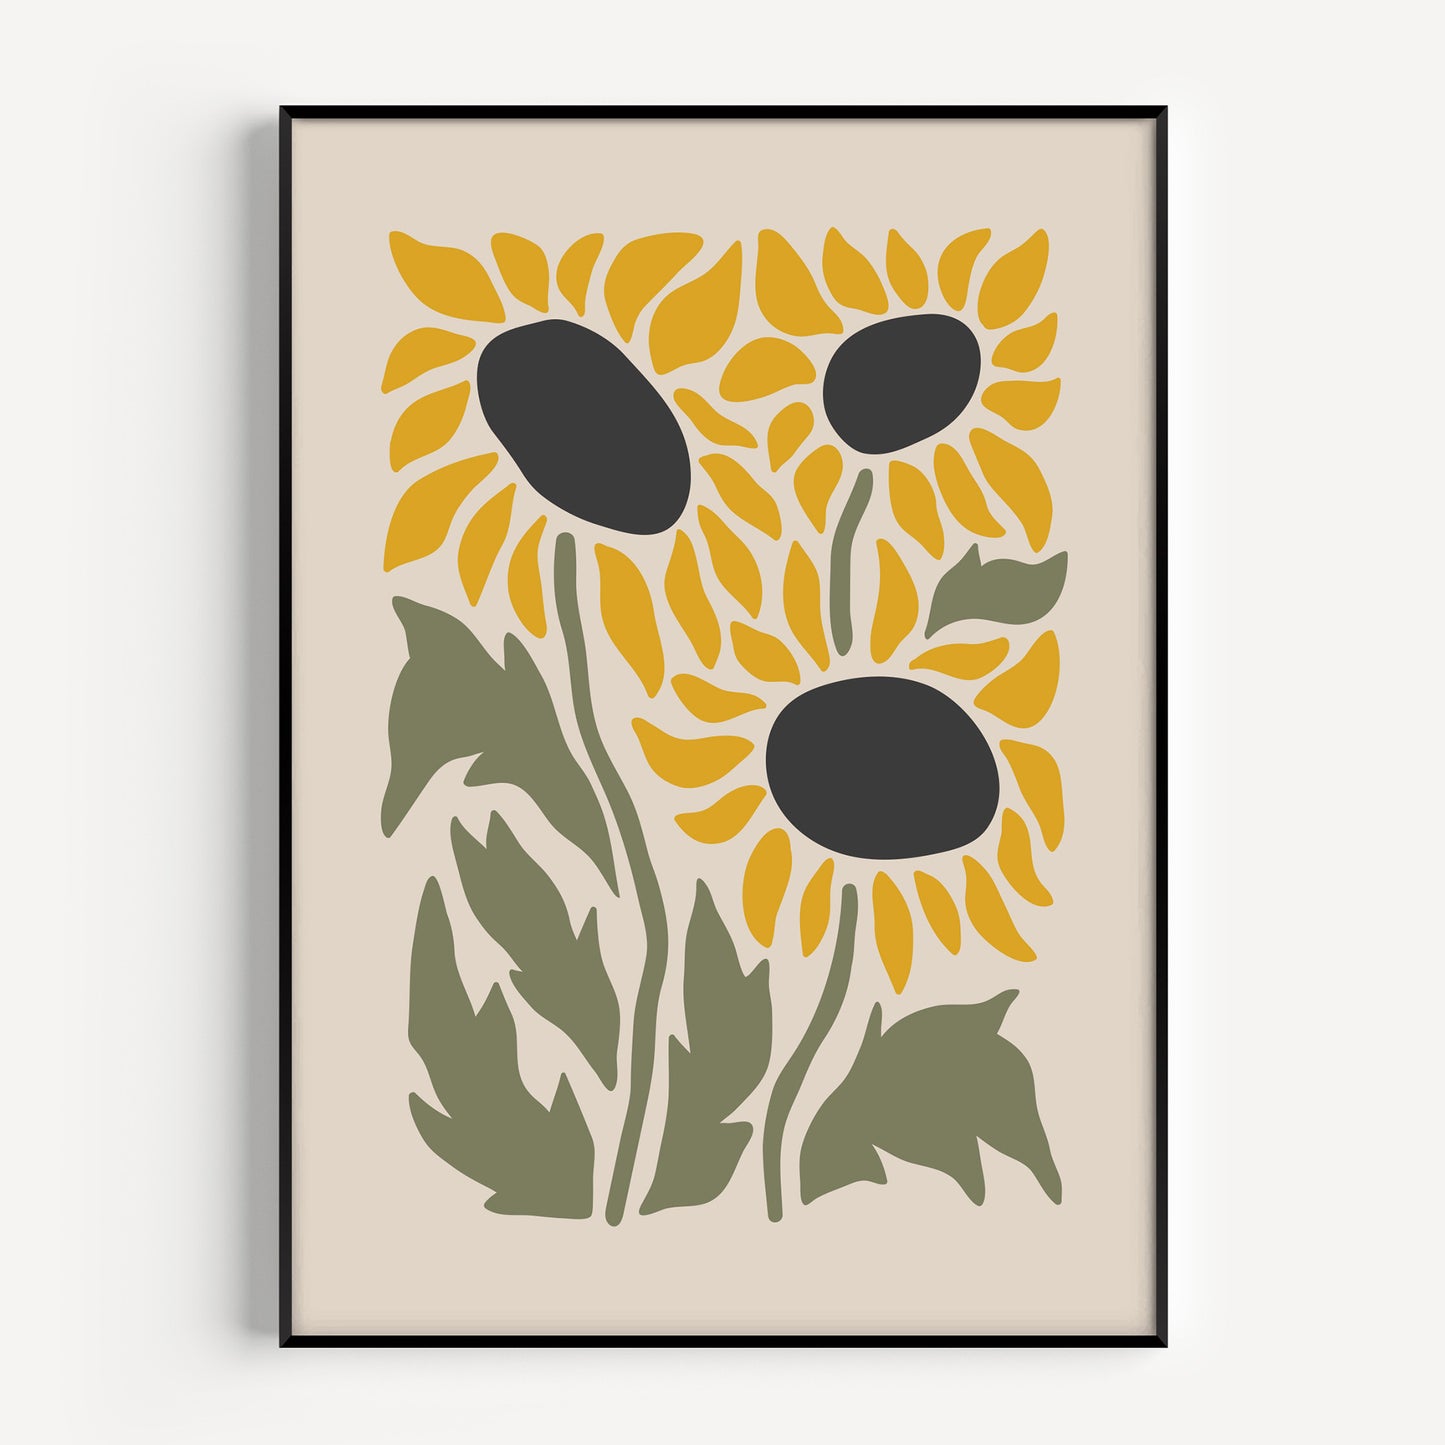 Sunflower print in green and yellow in a minimalist style